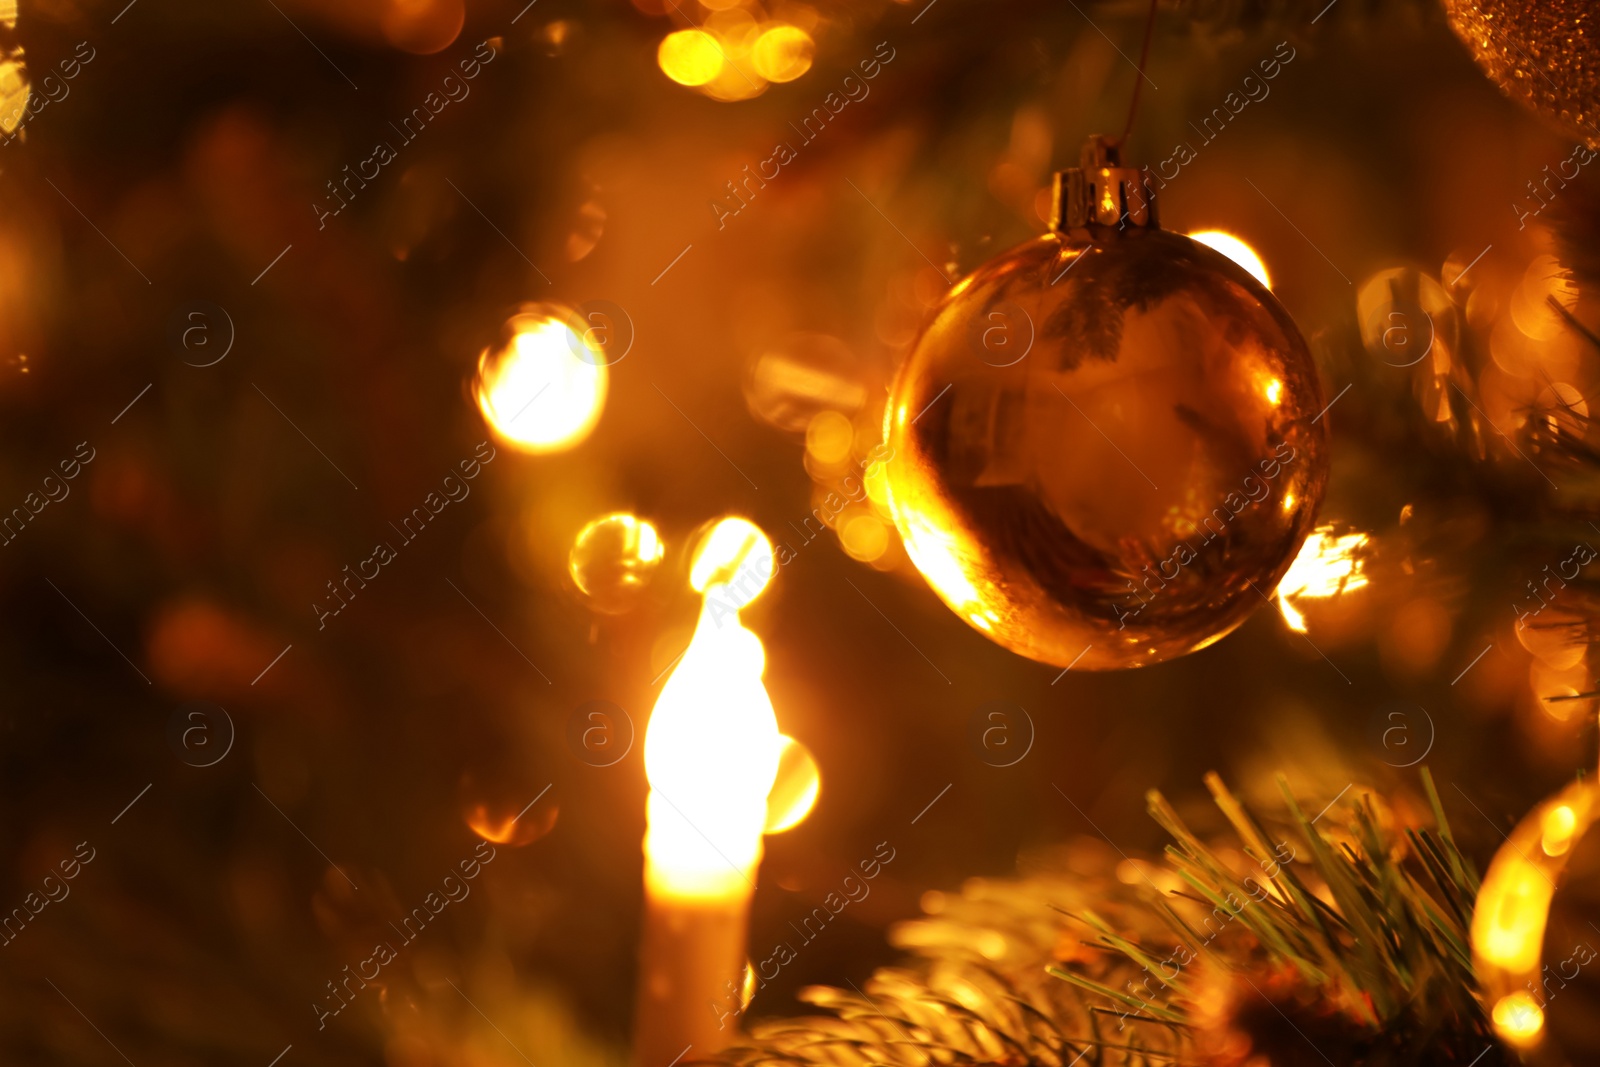 Photo of Closeup view of beautifully decorated Christmas tree indoors